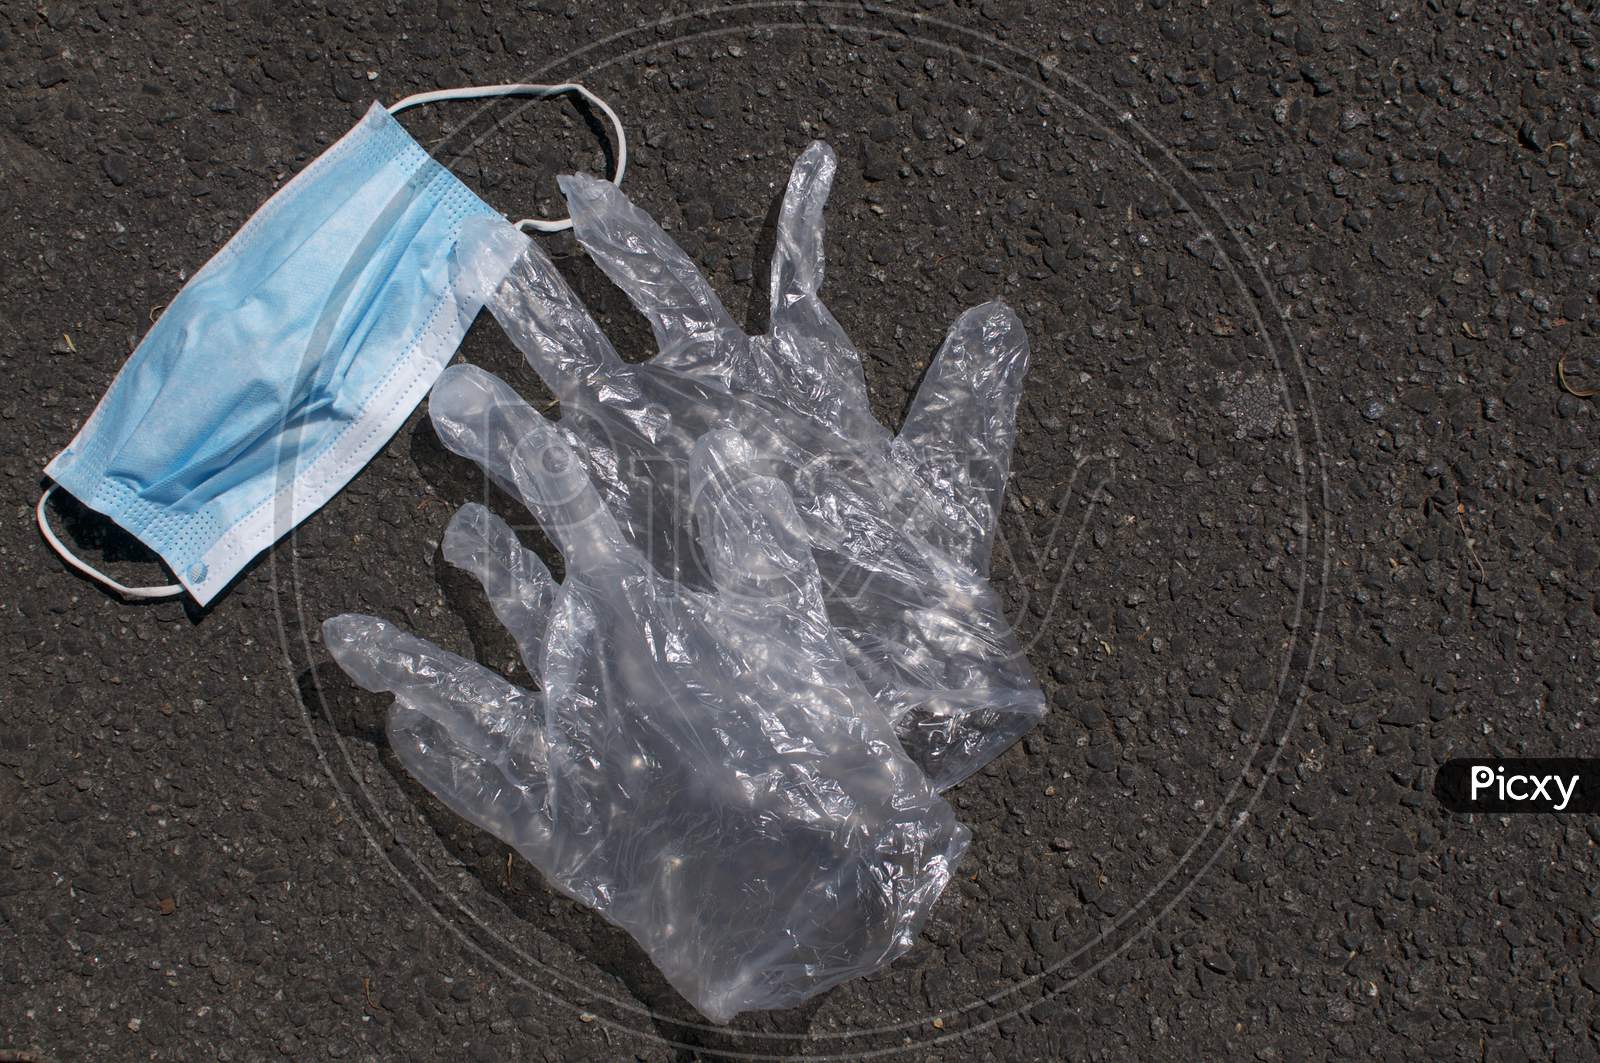 Surgical Mask And Disposable Gloves Dumped On A Street